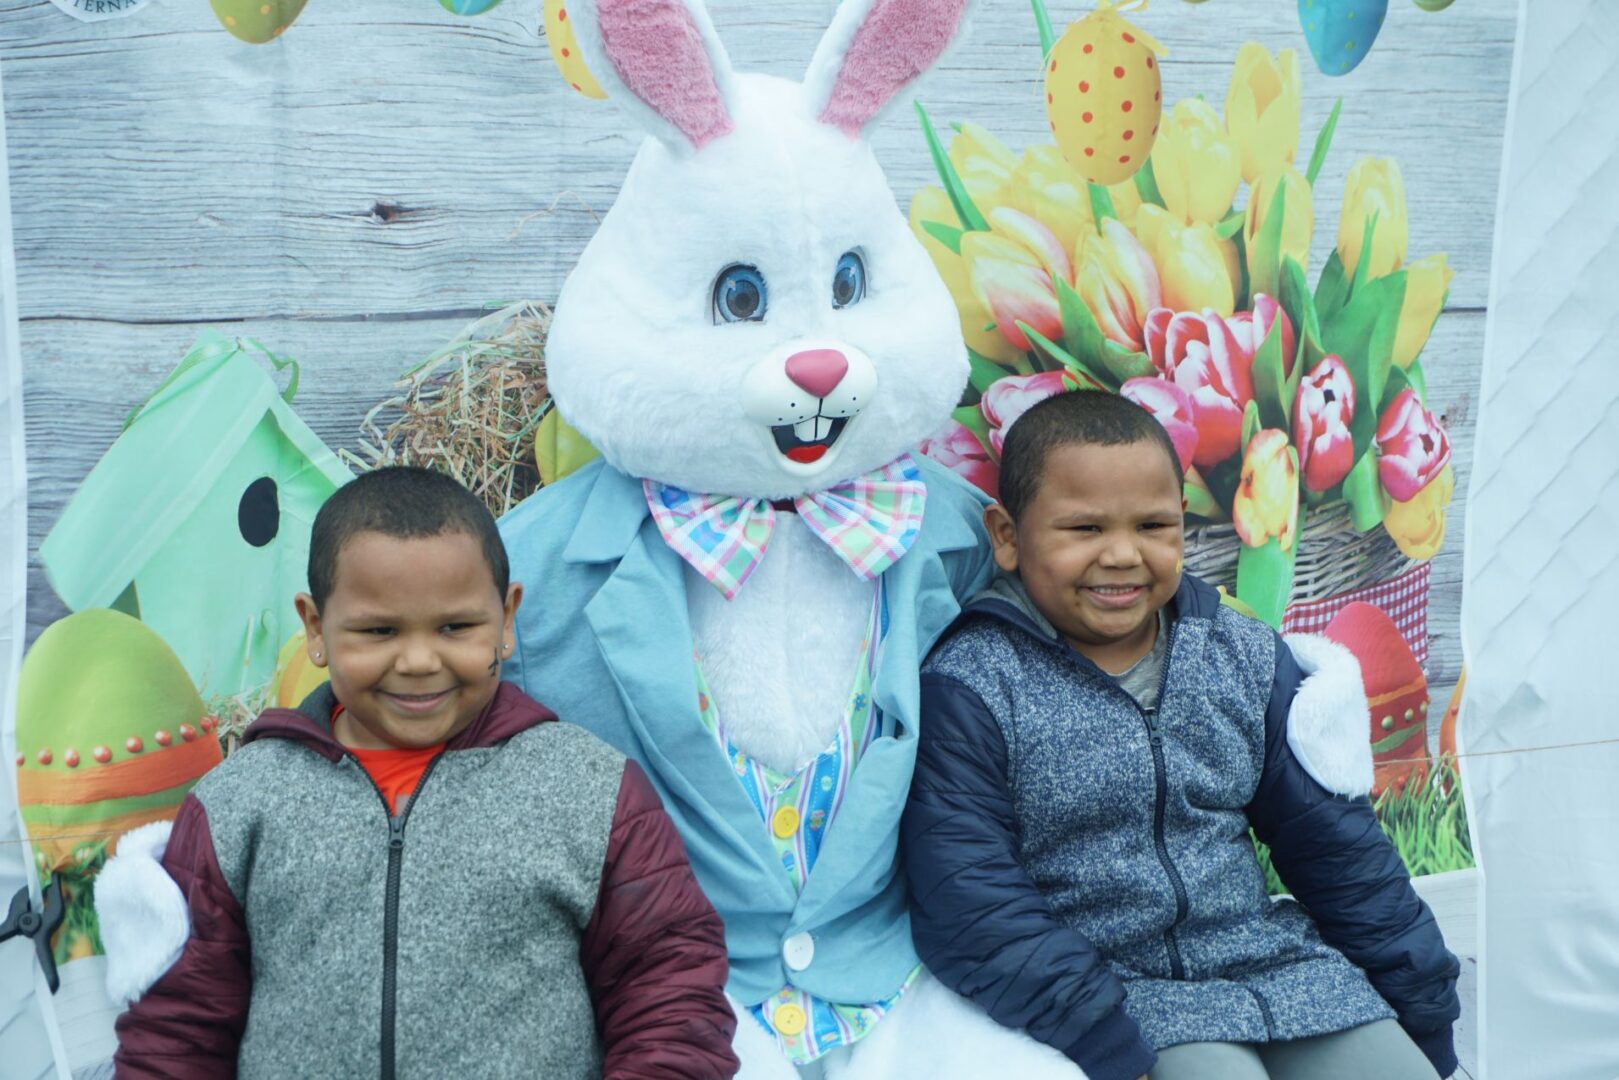 The bunny mascot together with twin boys wearing a blue and red jacket (2)